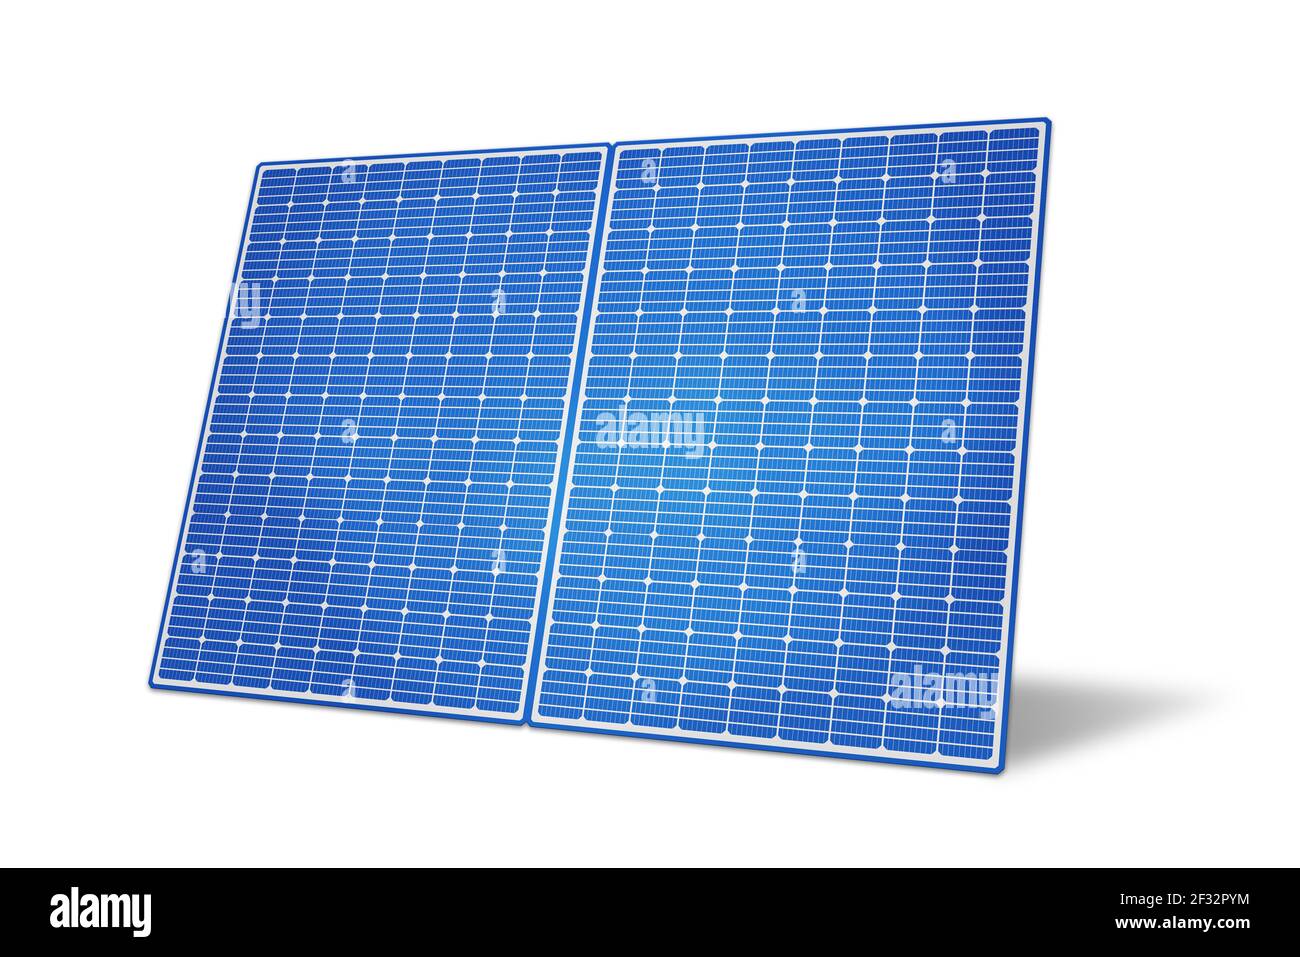 Solar panel illustration with 3D render on white background. Photovoltaic, renewable energy sources concept Stock Photo